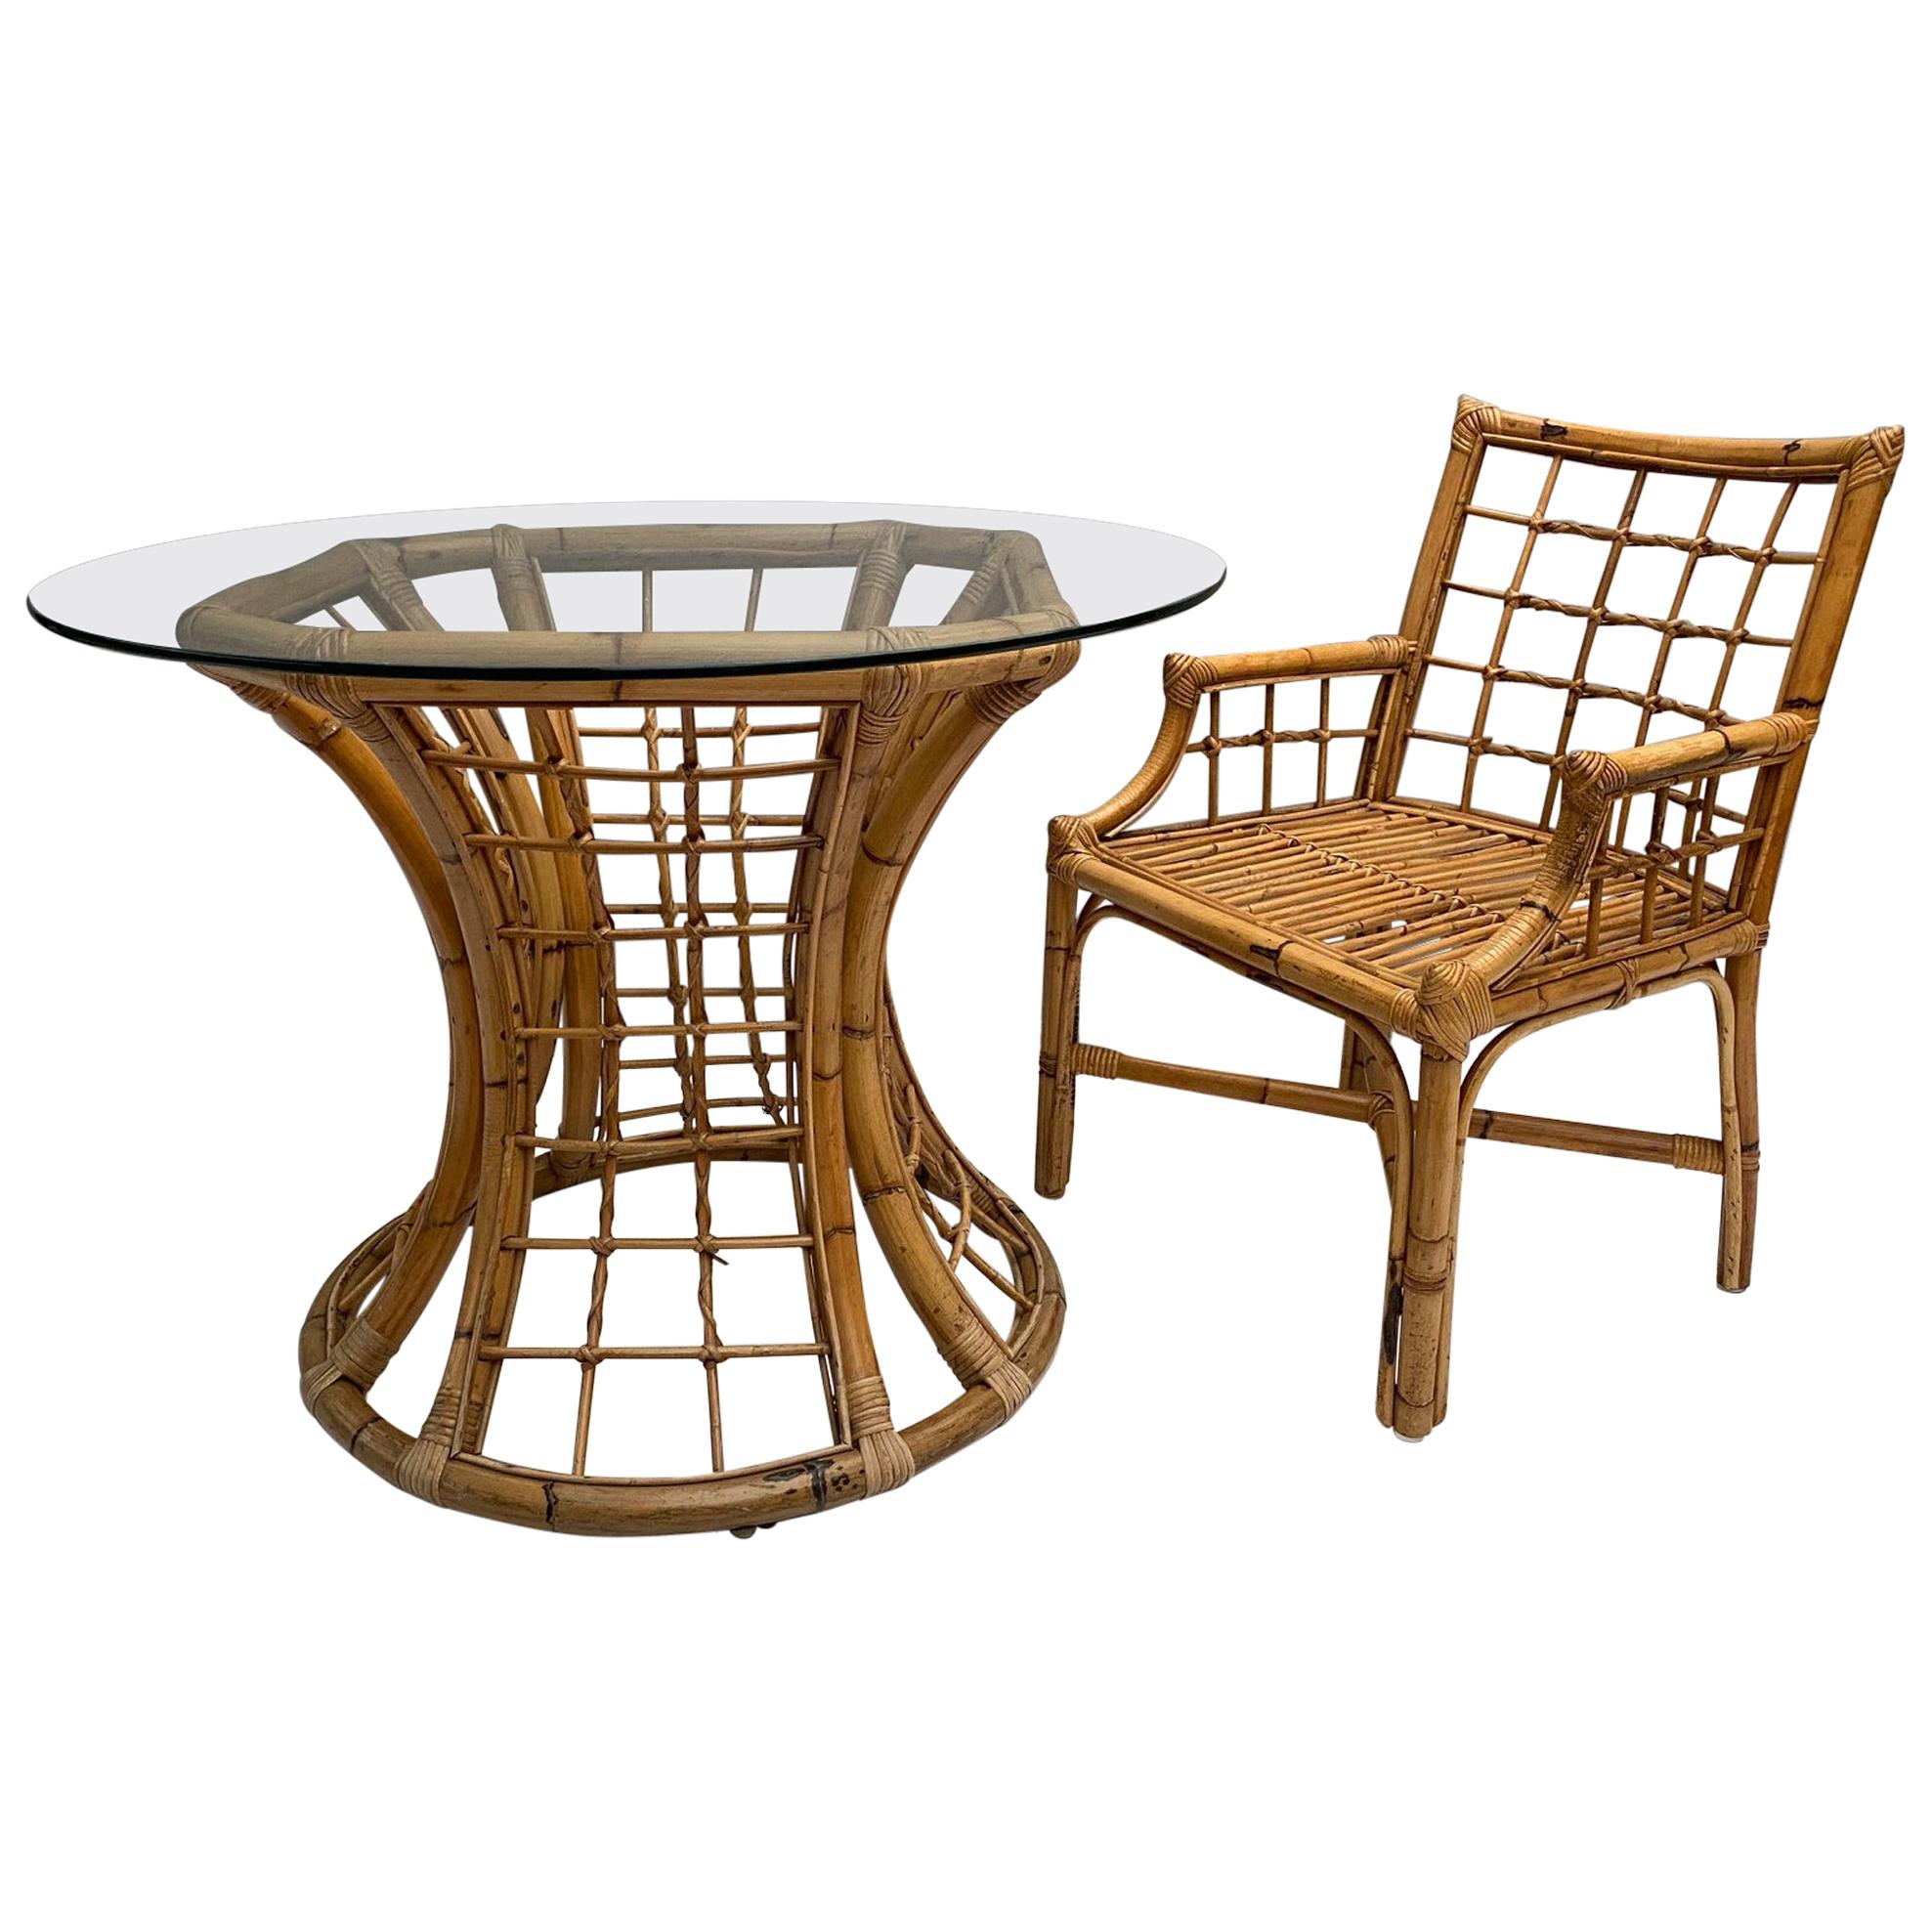 Rattan Table with Glass Top